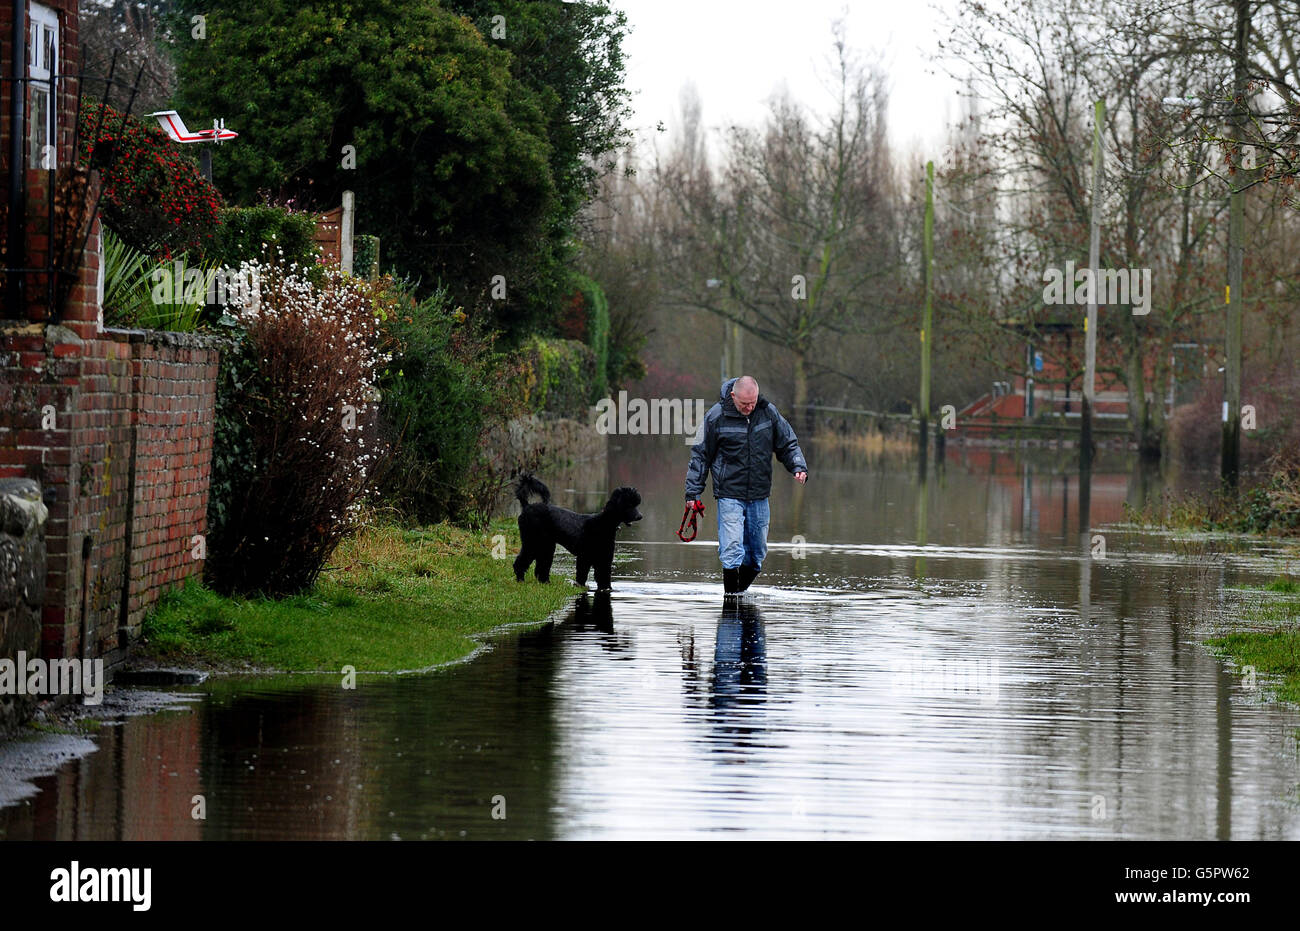 Wet weather in Barrow upon Trent, Derbyshire, as a wet and stormy weekend could mark the end of one of the wettest years in history in Britain, with no respite expected for the saturated south west. Stock Photo